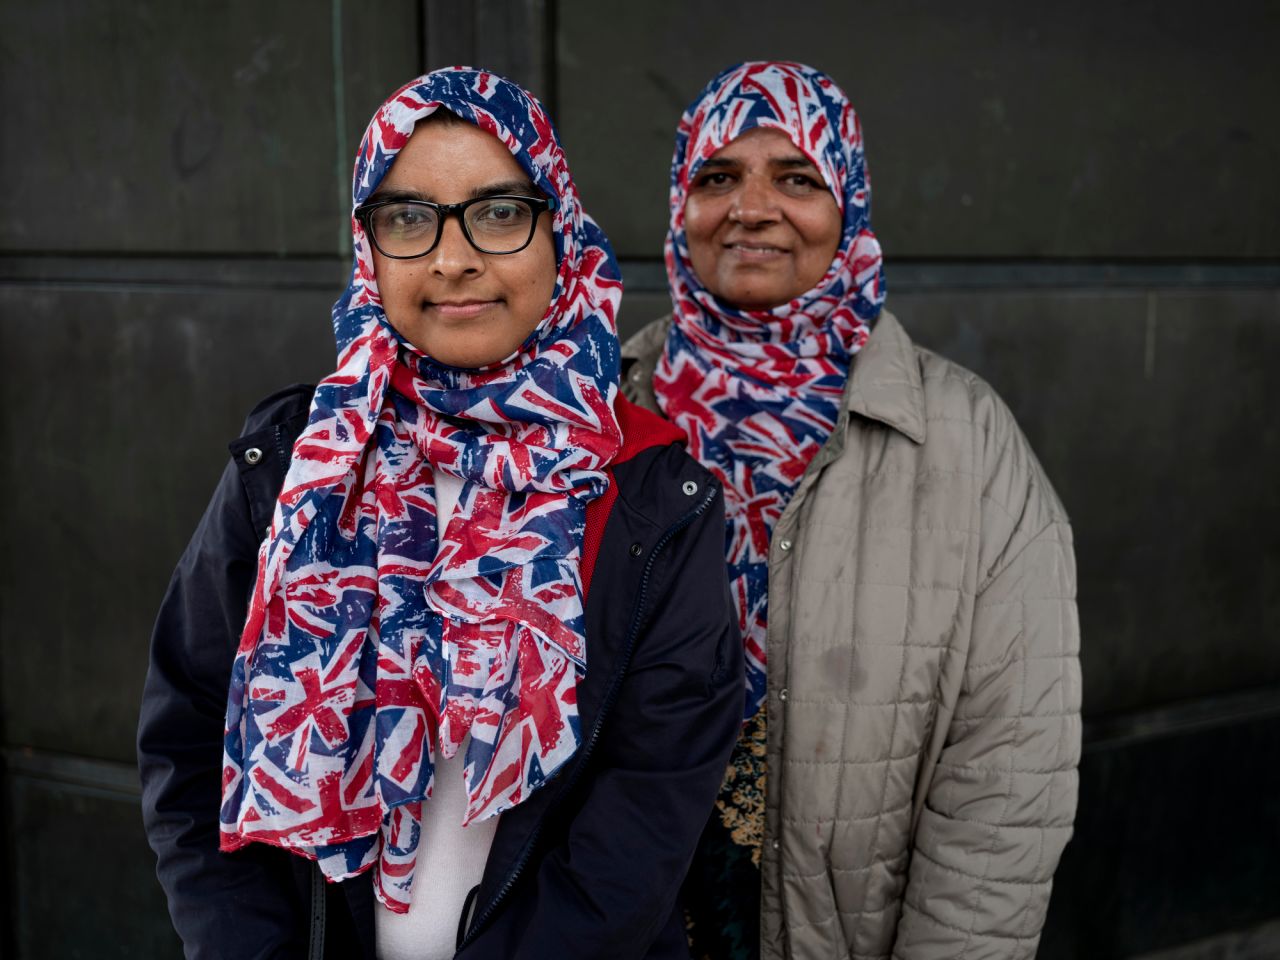 Farkhanda Ahmed and her mother Shakeela came from the town of Slough in Berkshire, England. 